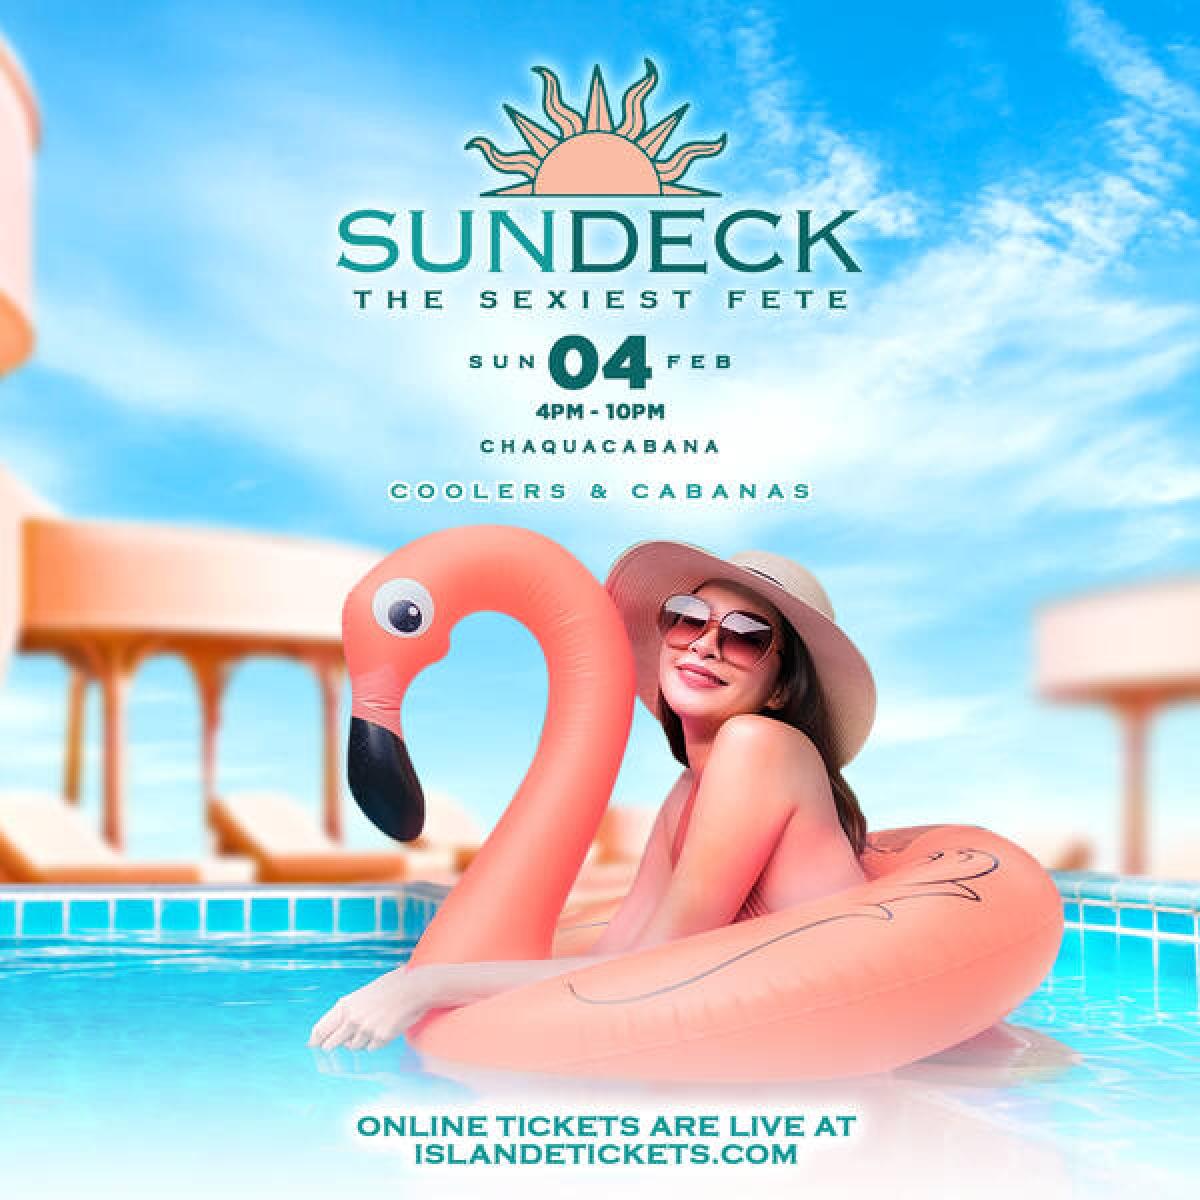 Sundeck  flyer or graphic.